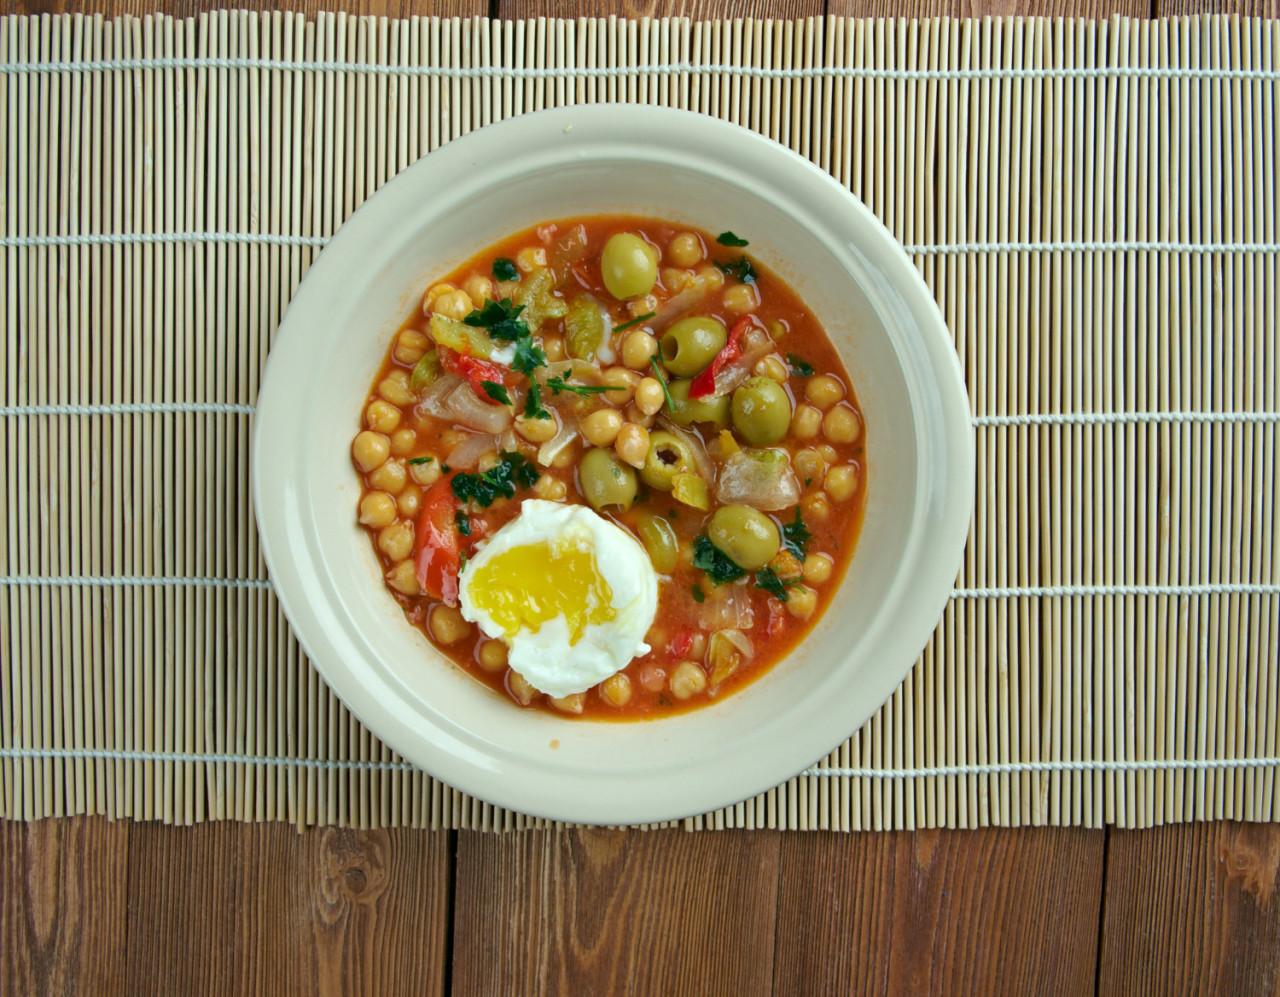 lablabi tunisian dish based chick peas raw soft cooked egg mix along with olive oil harissa sometimes olives garlic vinegar